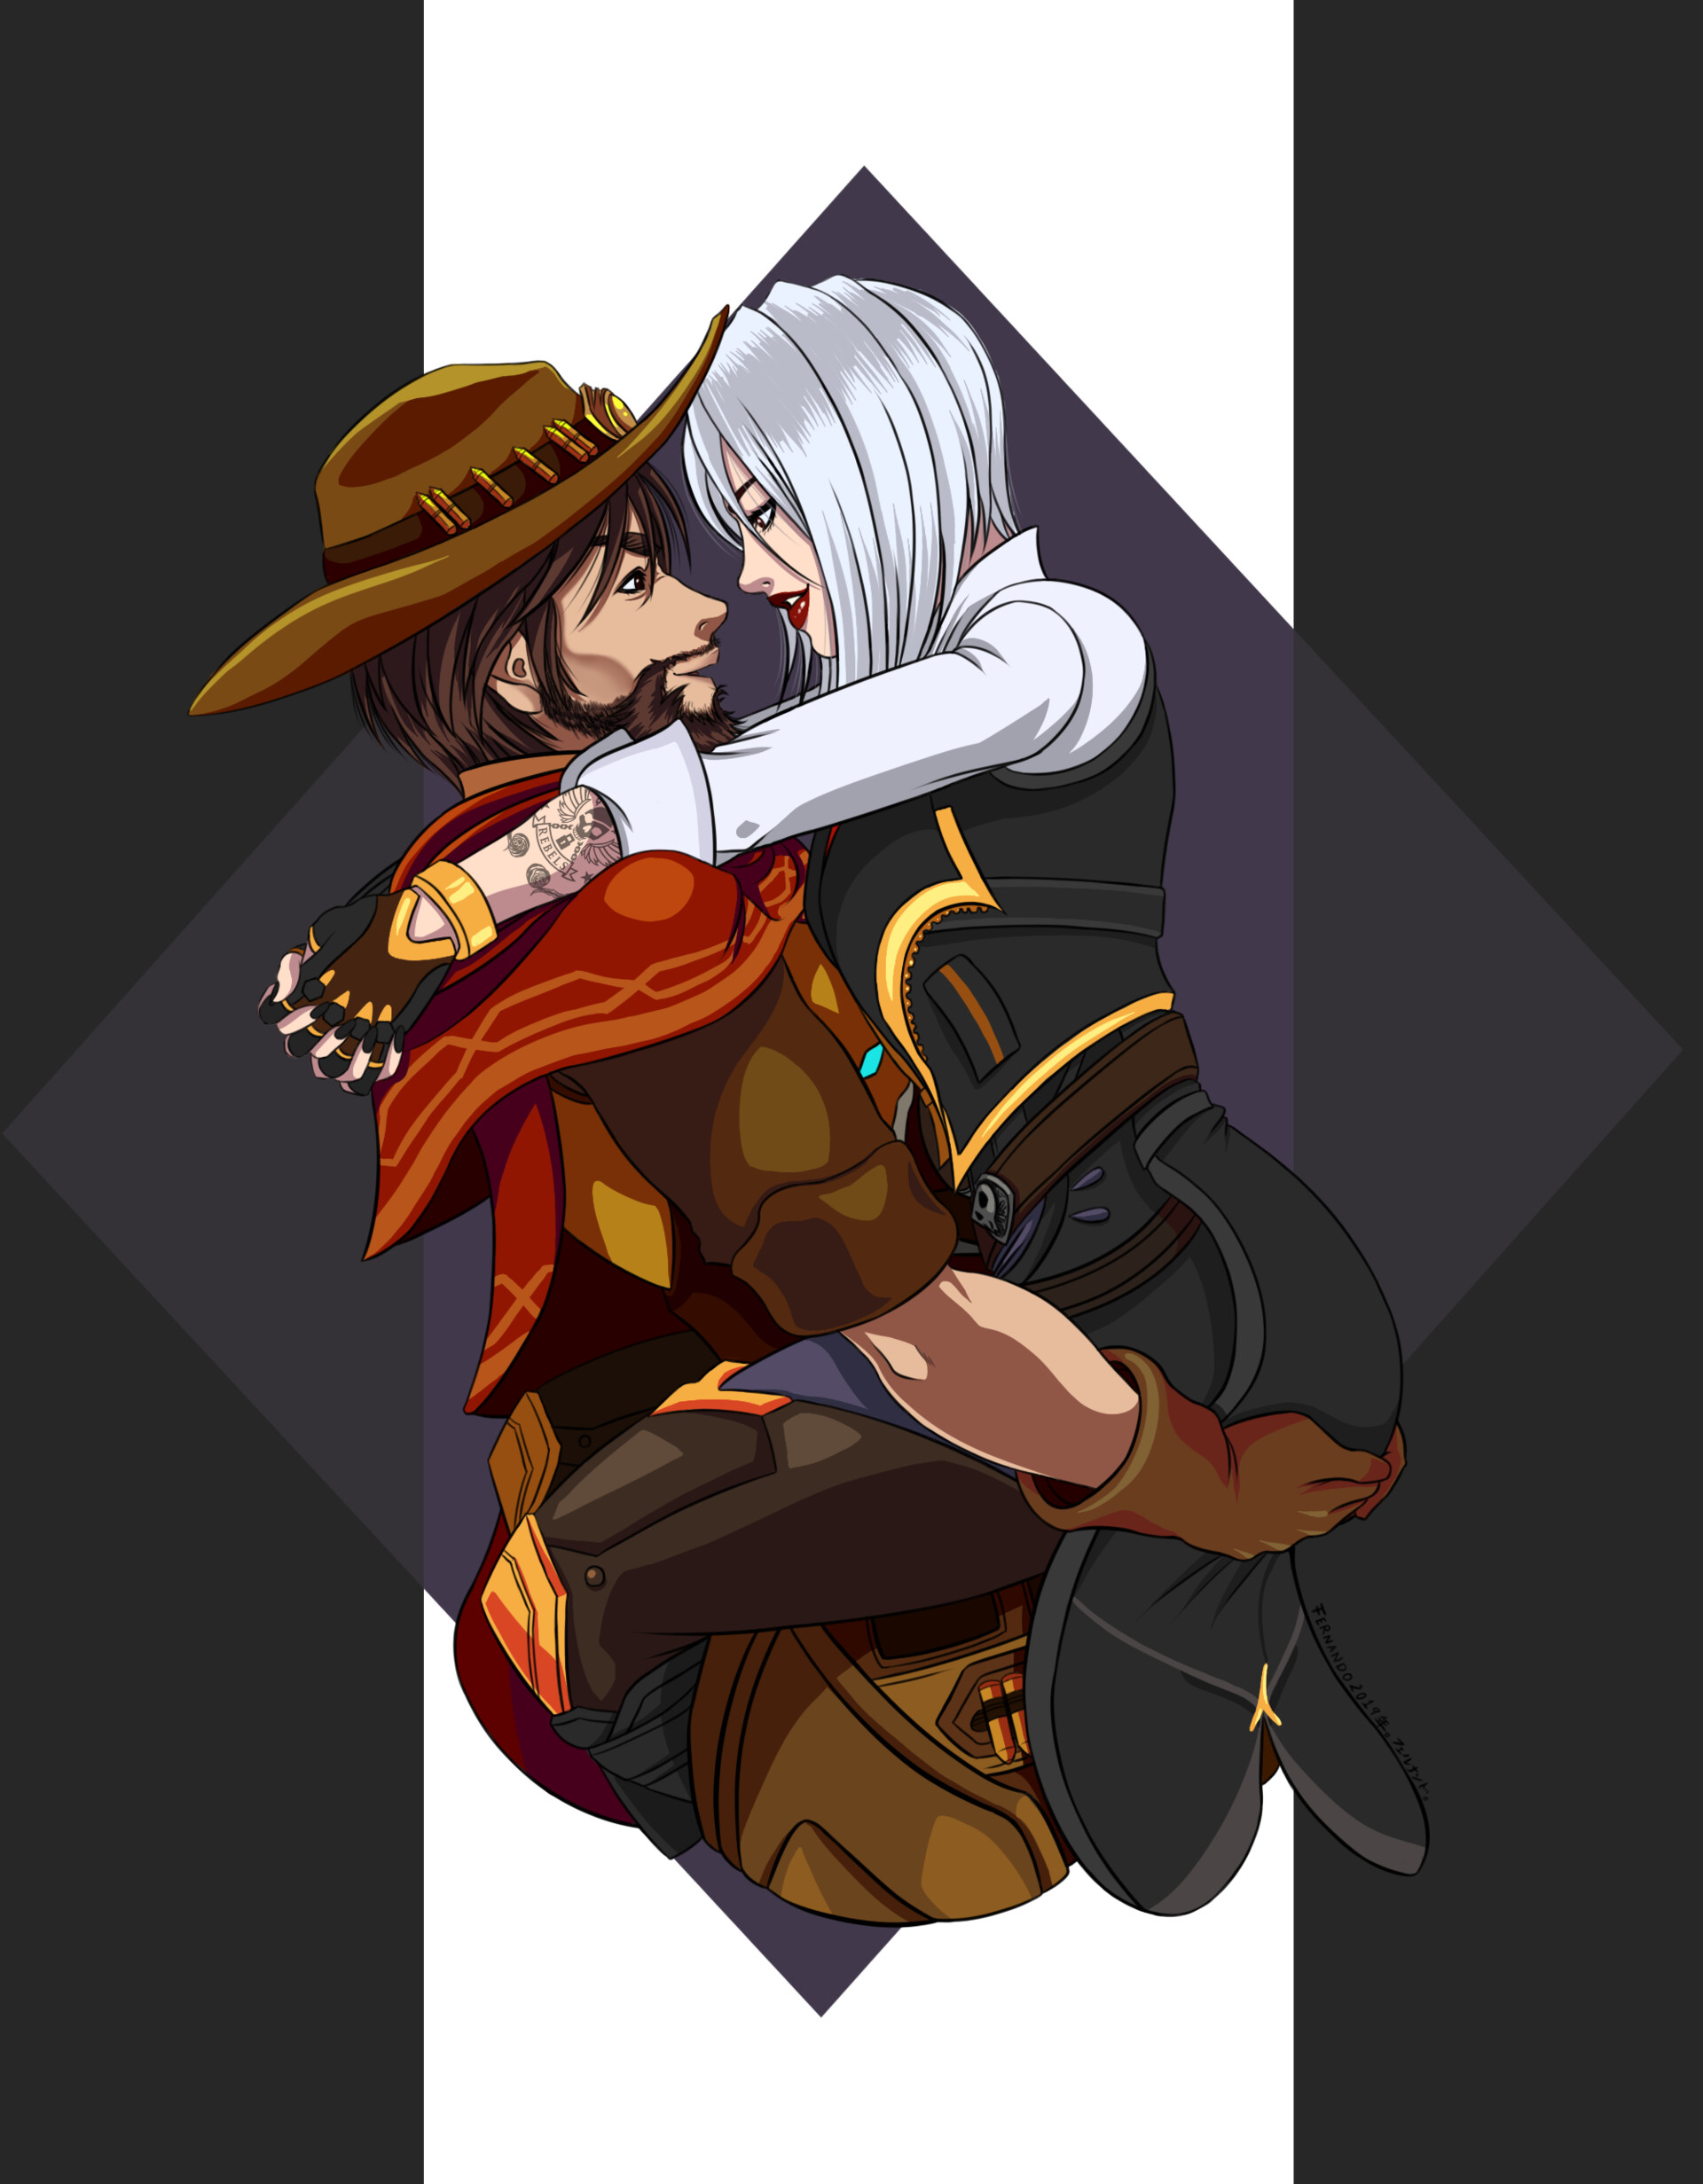 Fanart of McCree and Ashe from Overwatch. 